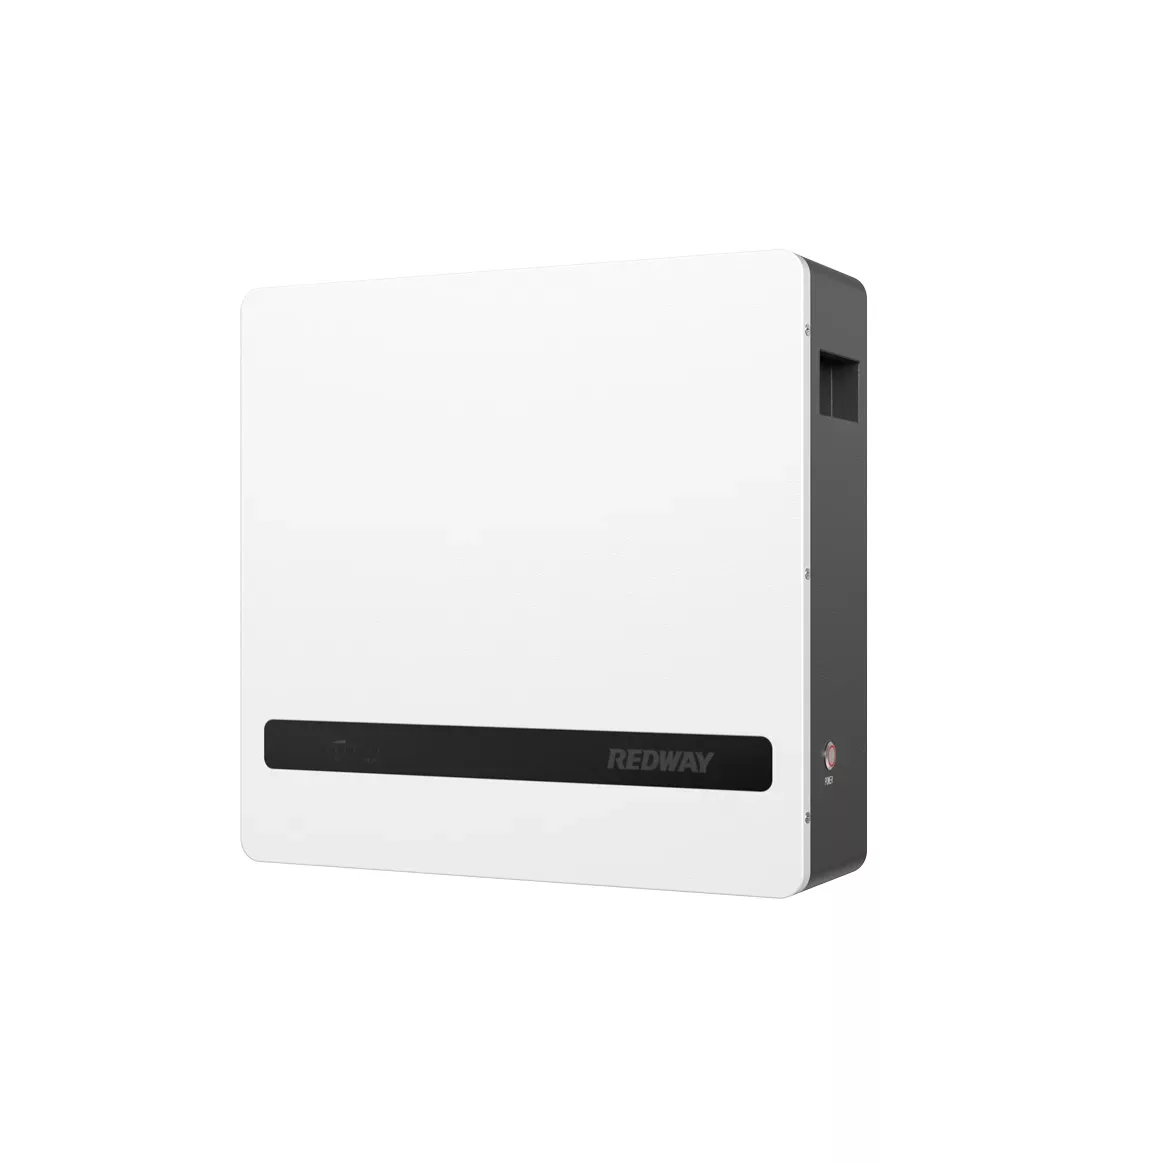  PW51100-F Power Storage Wall, Maximize Your Home